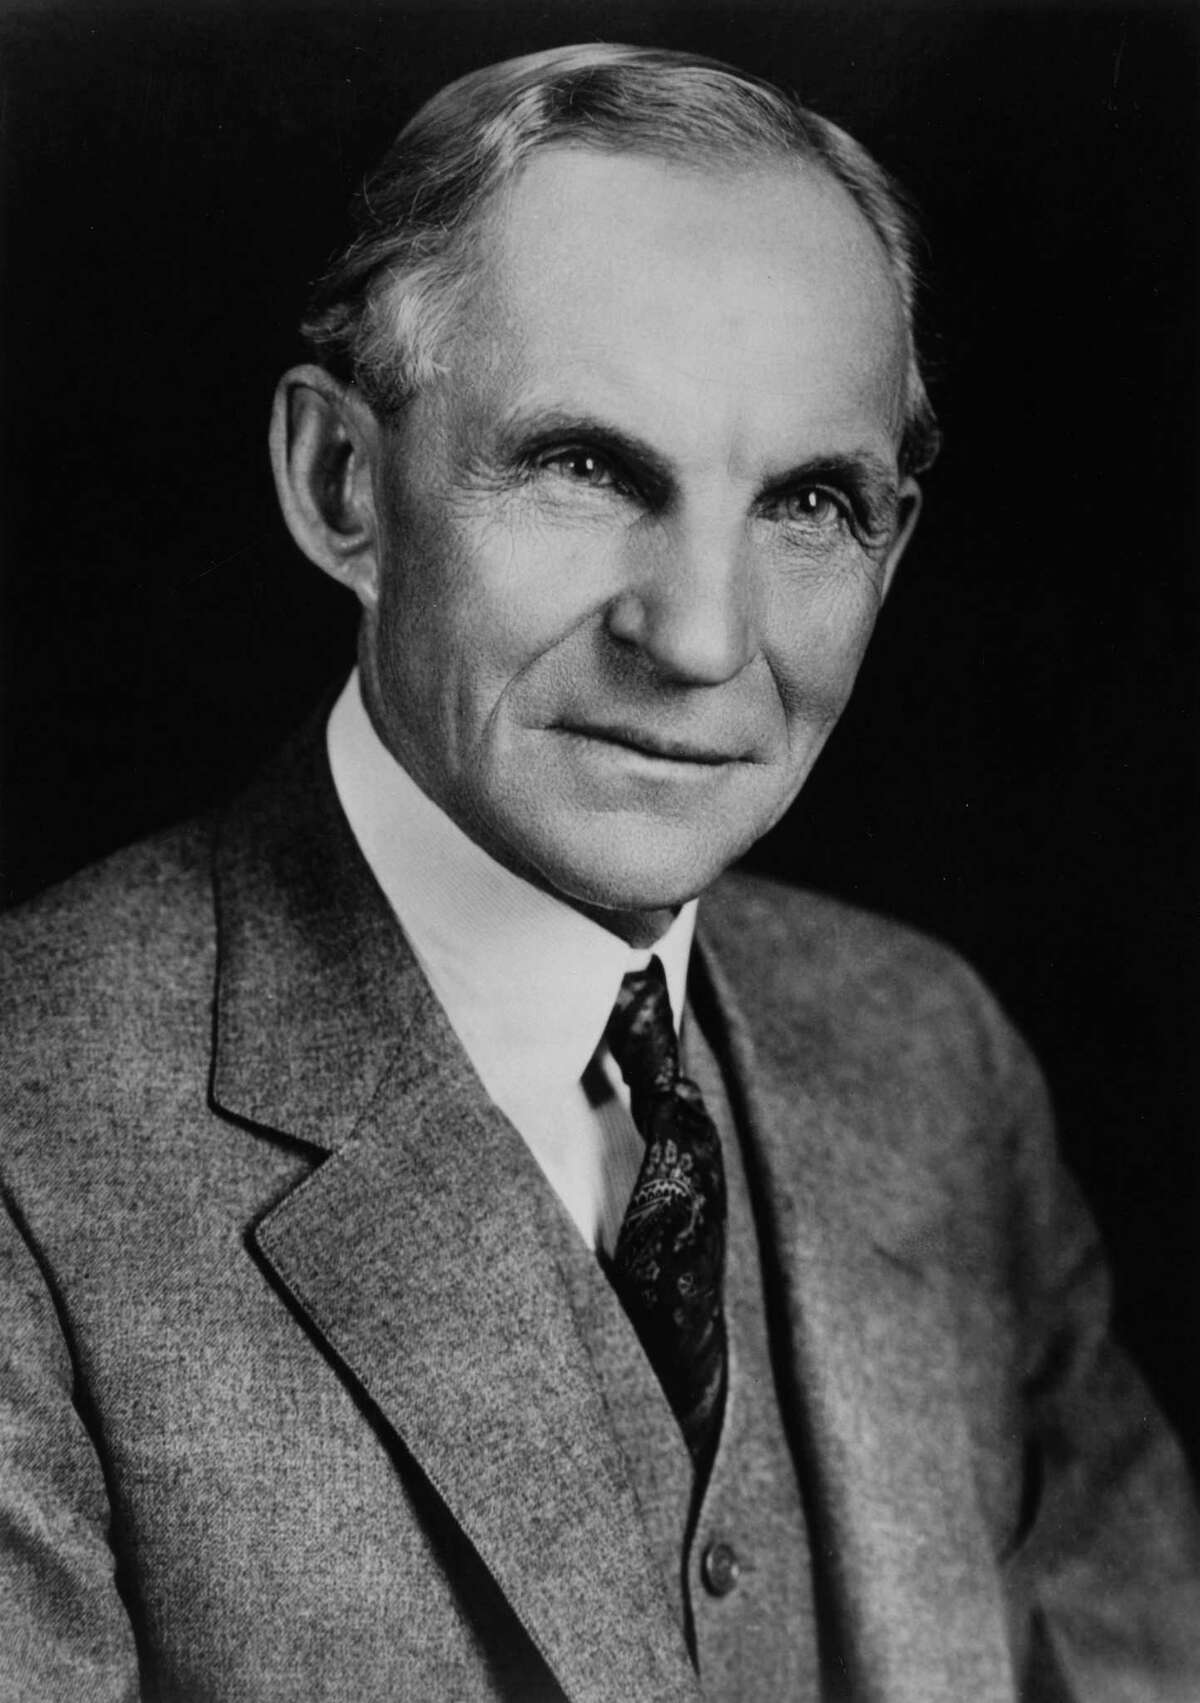 American industrialist and pioneer in the motor vehicle industry, Henry Ford (1863 - 1947). (Photo by Keystone/Getty Images)